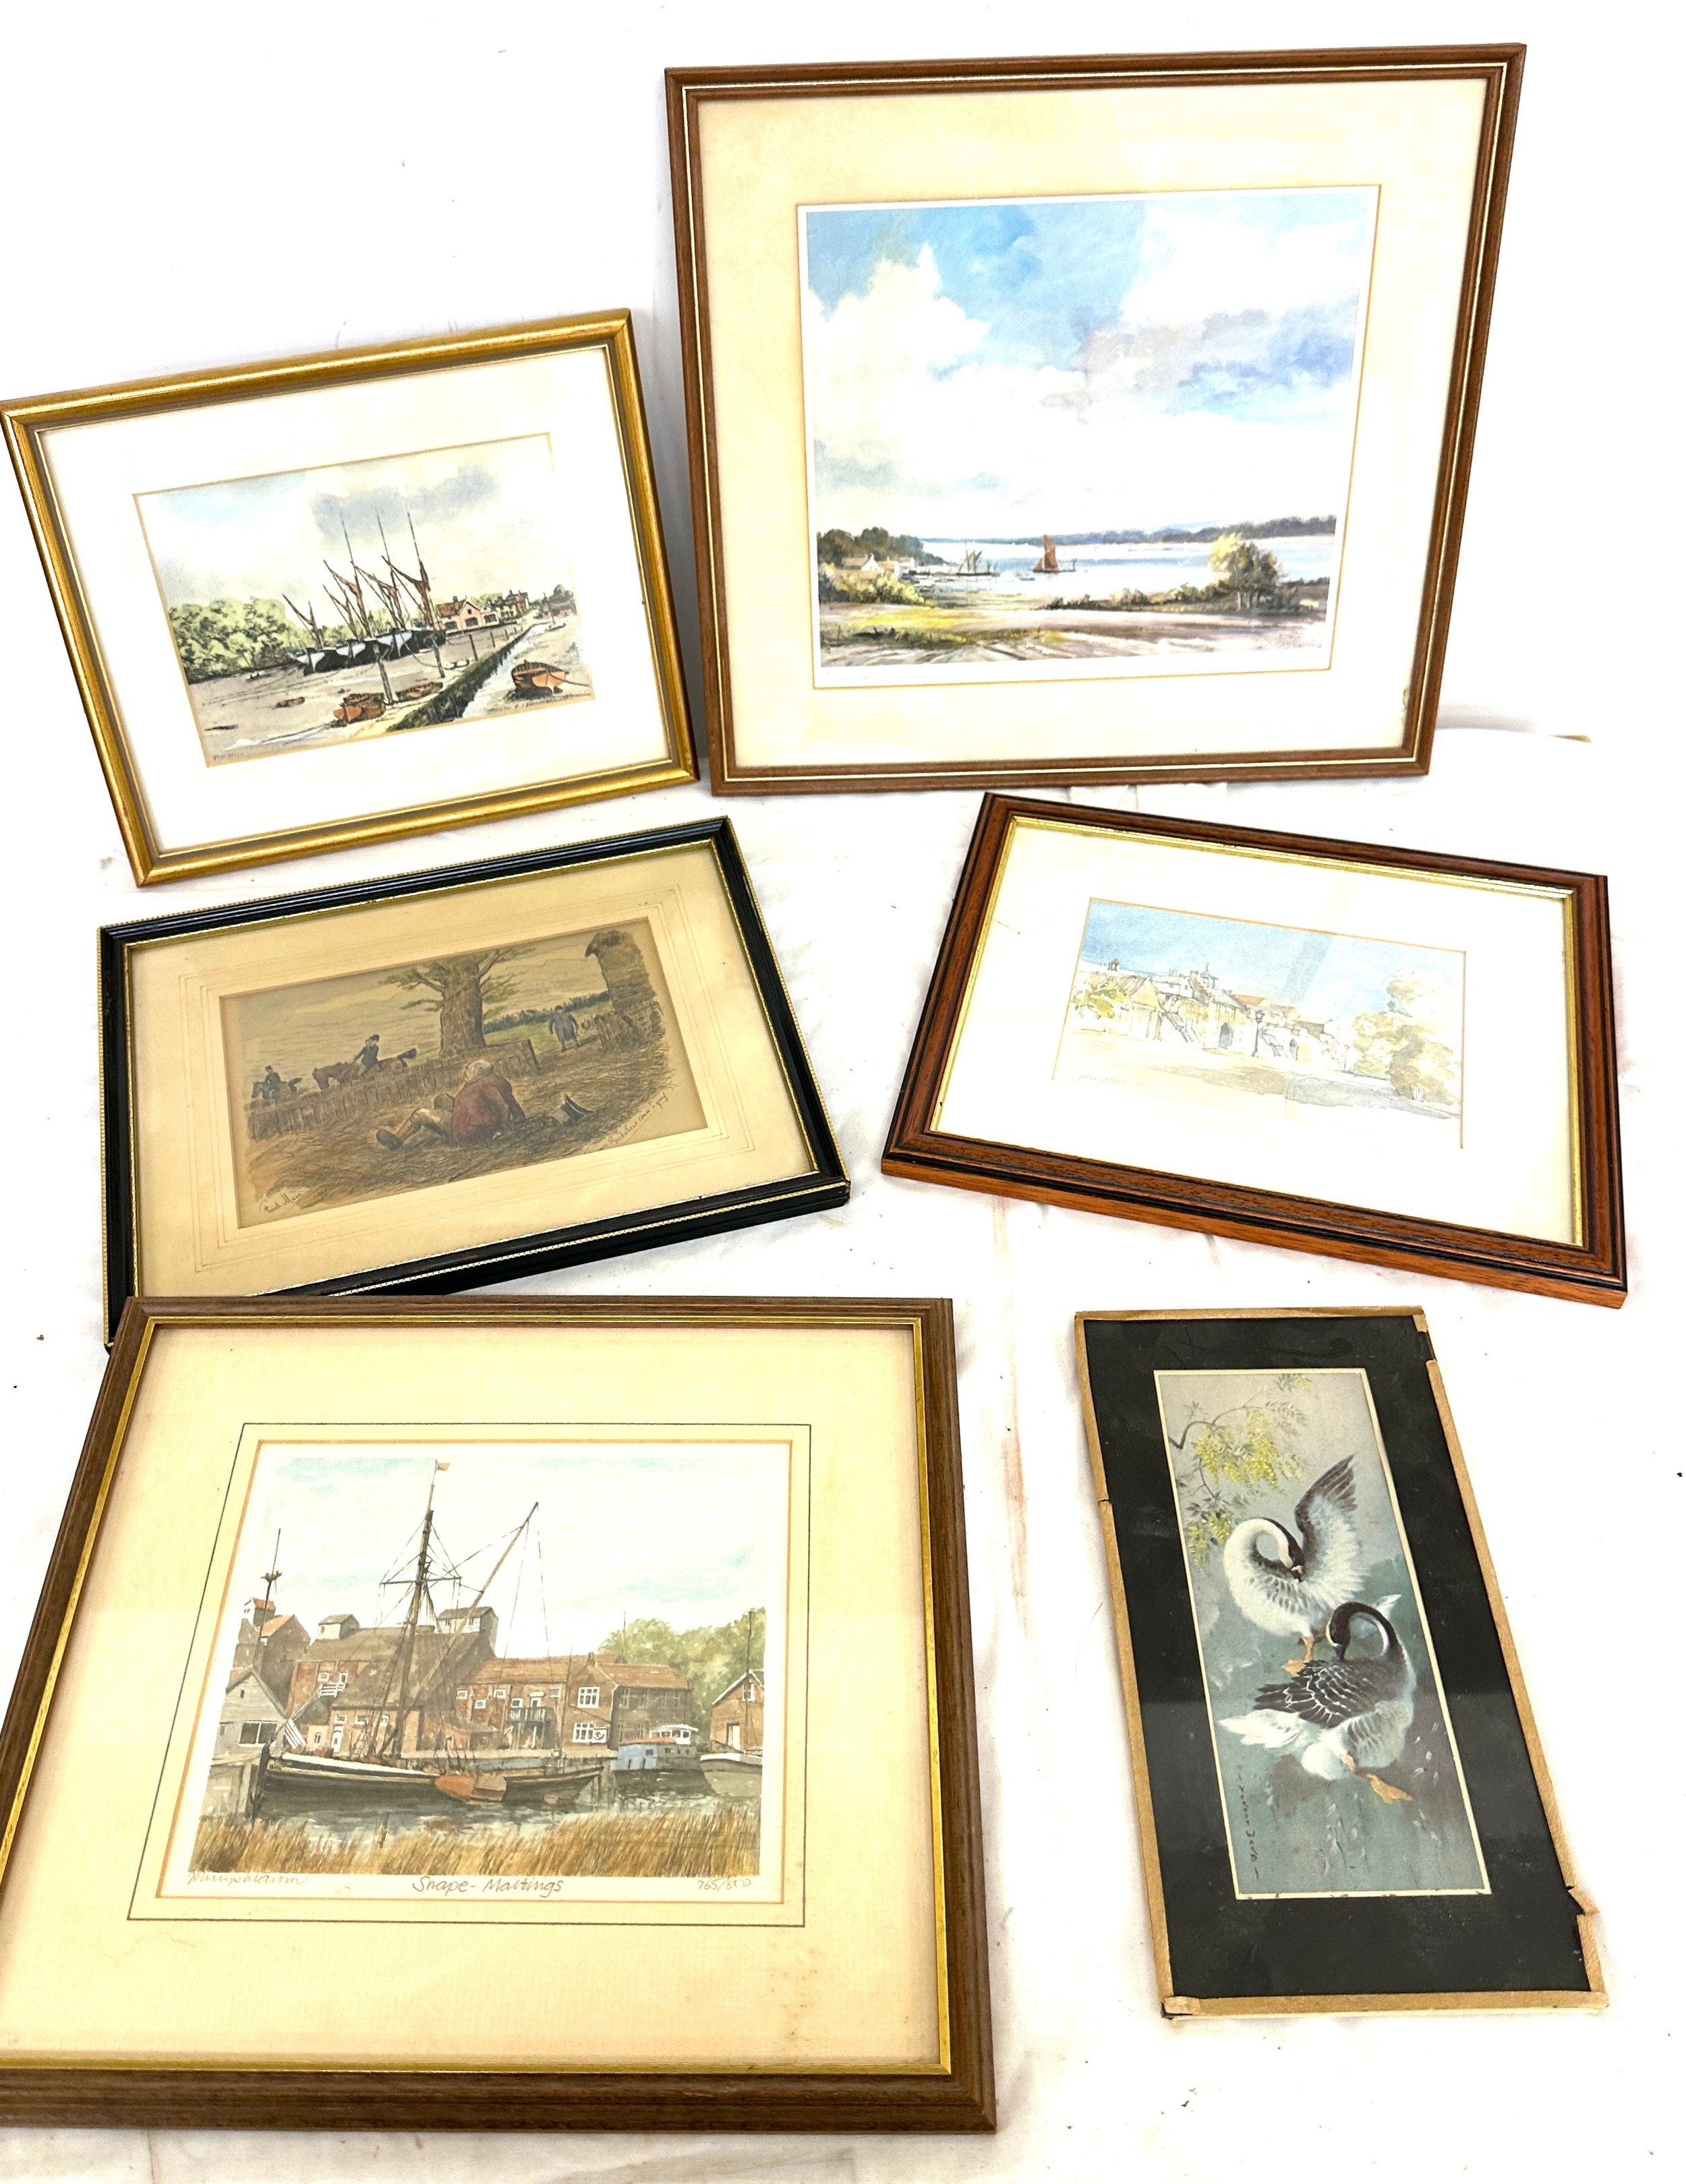 Framed prints by Shirley Carnt, Signed watercolour by Melvyn R J Brinkley, Watercolour by John